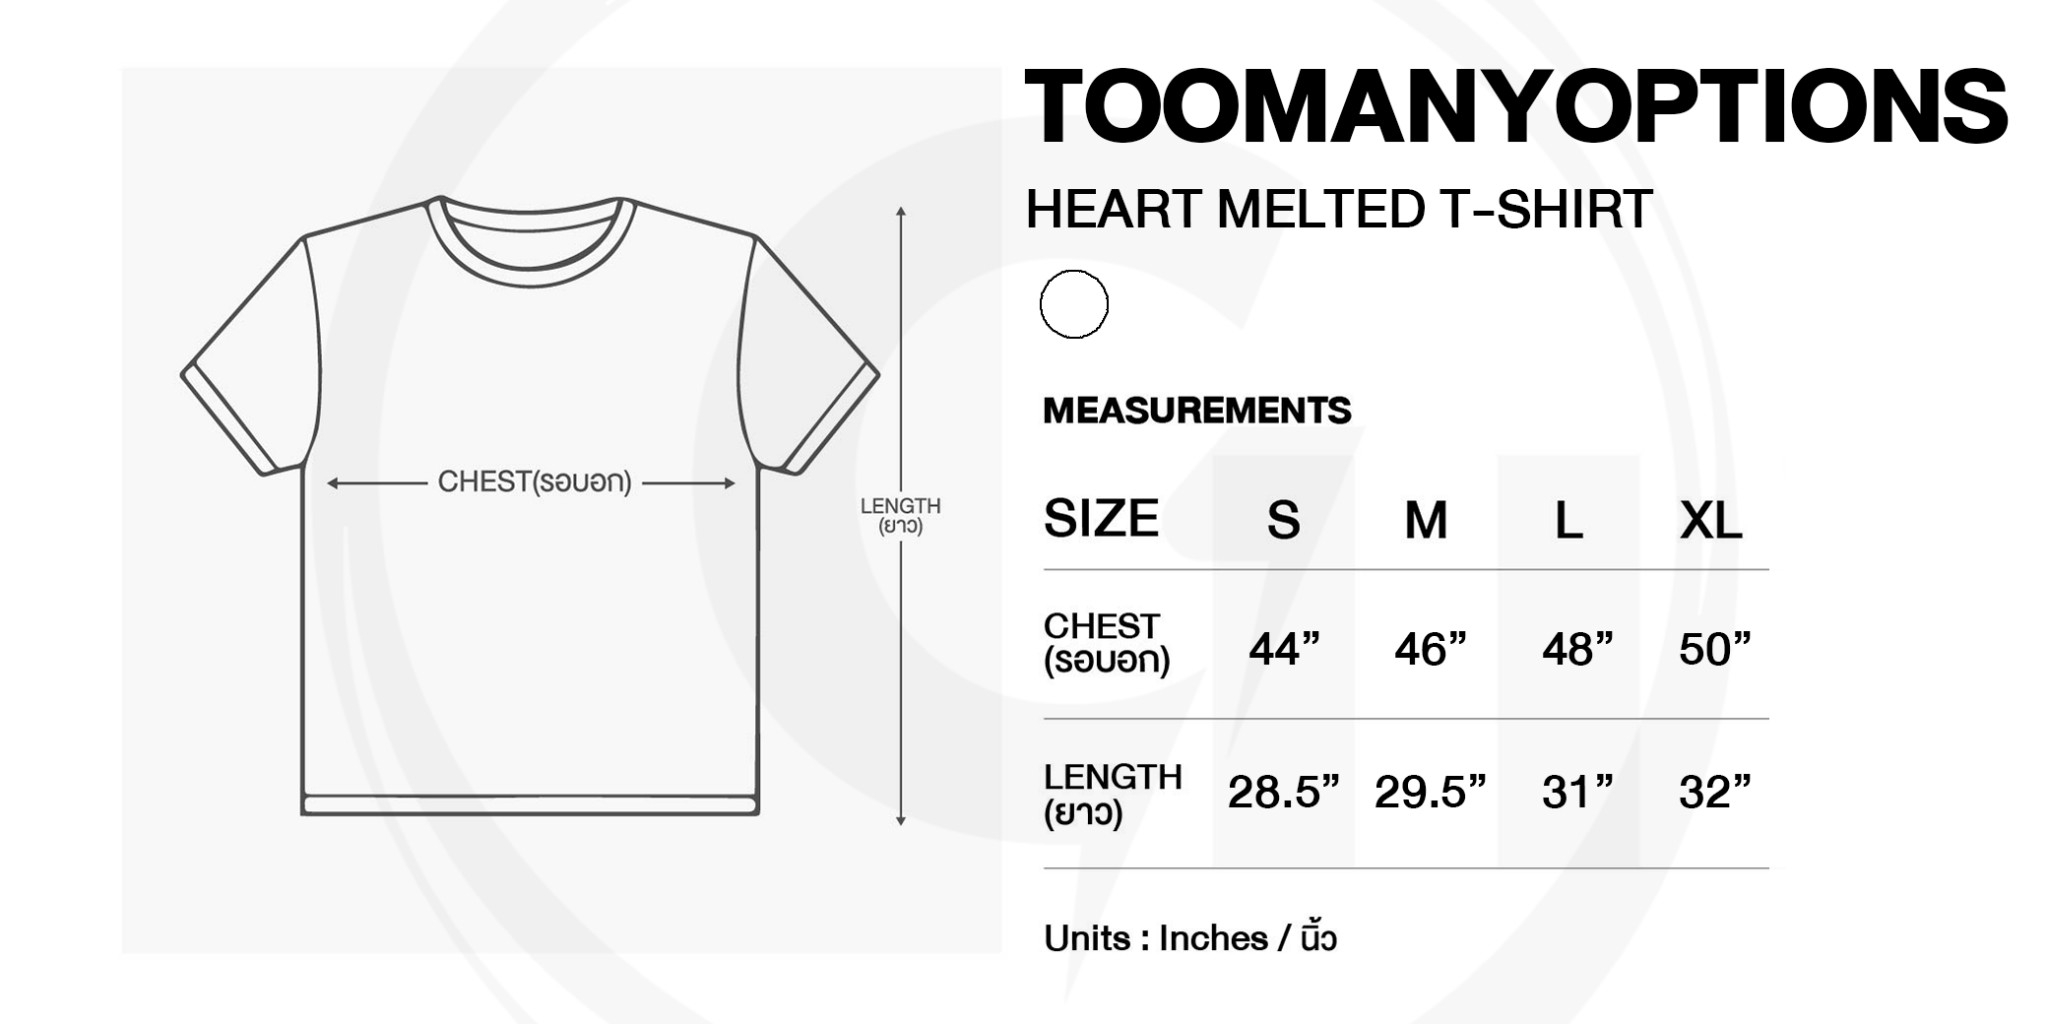 TOOMANY OPTIONS HEART MELTED T-SHIRT WHITE